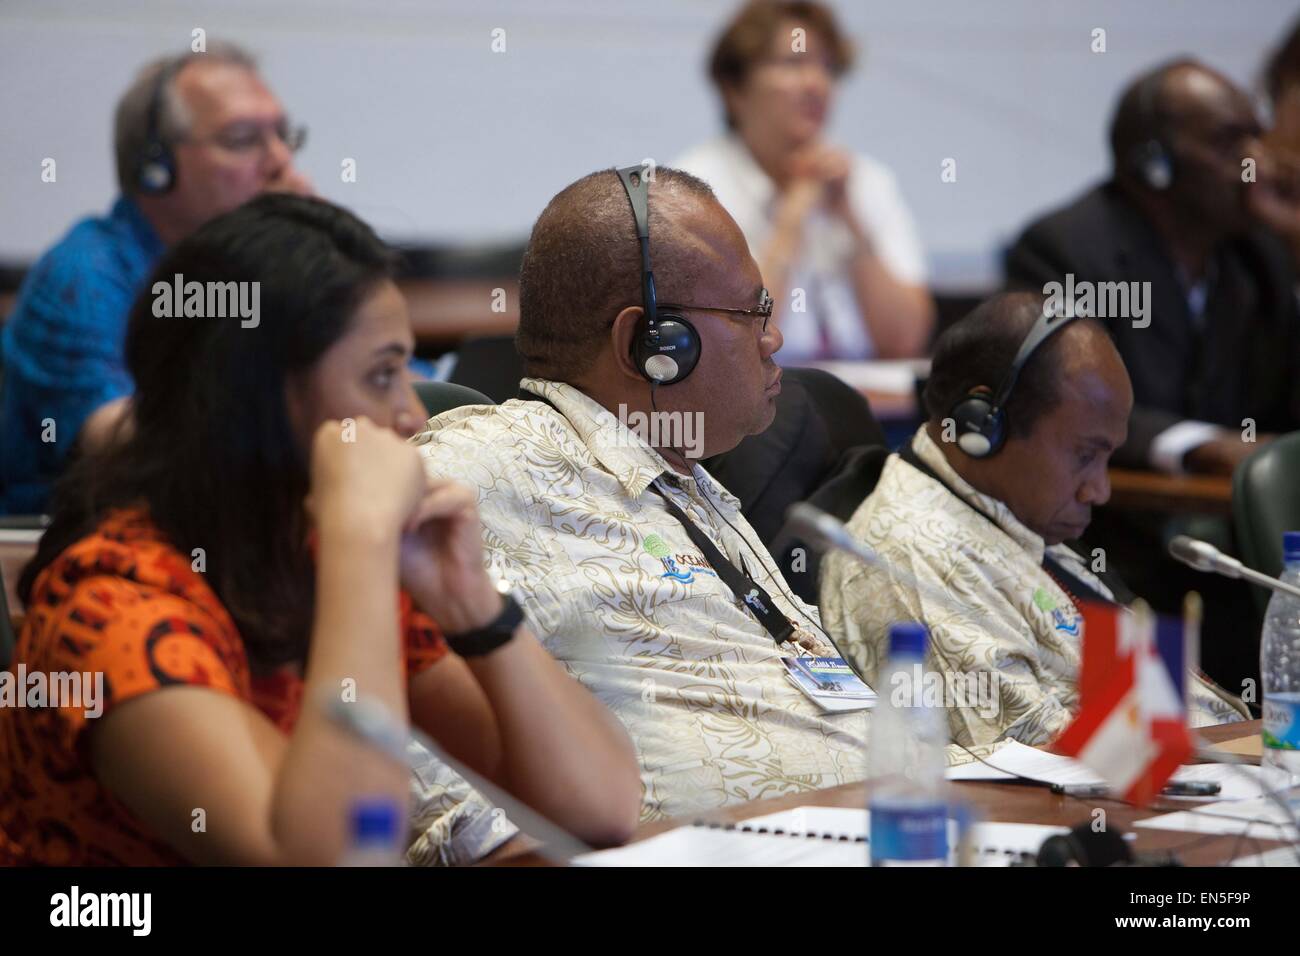 Noumea, New Caledonia. 28th April, 2015. Oceania 21, Meetings, third edition of the Oceanian summit on sustainable development, representatives of 17 South Pacific countries, 28, 29 and 30 April, climate change, roundable in the wake of Cyclone PAM in the Pacific, Samuel Manetoali, Minister of Climate Change of Salomon Islands, Credit:  Ania Freindorf/Alamy Live News Stock Photo